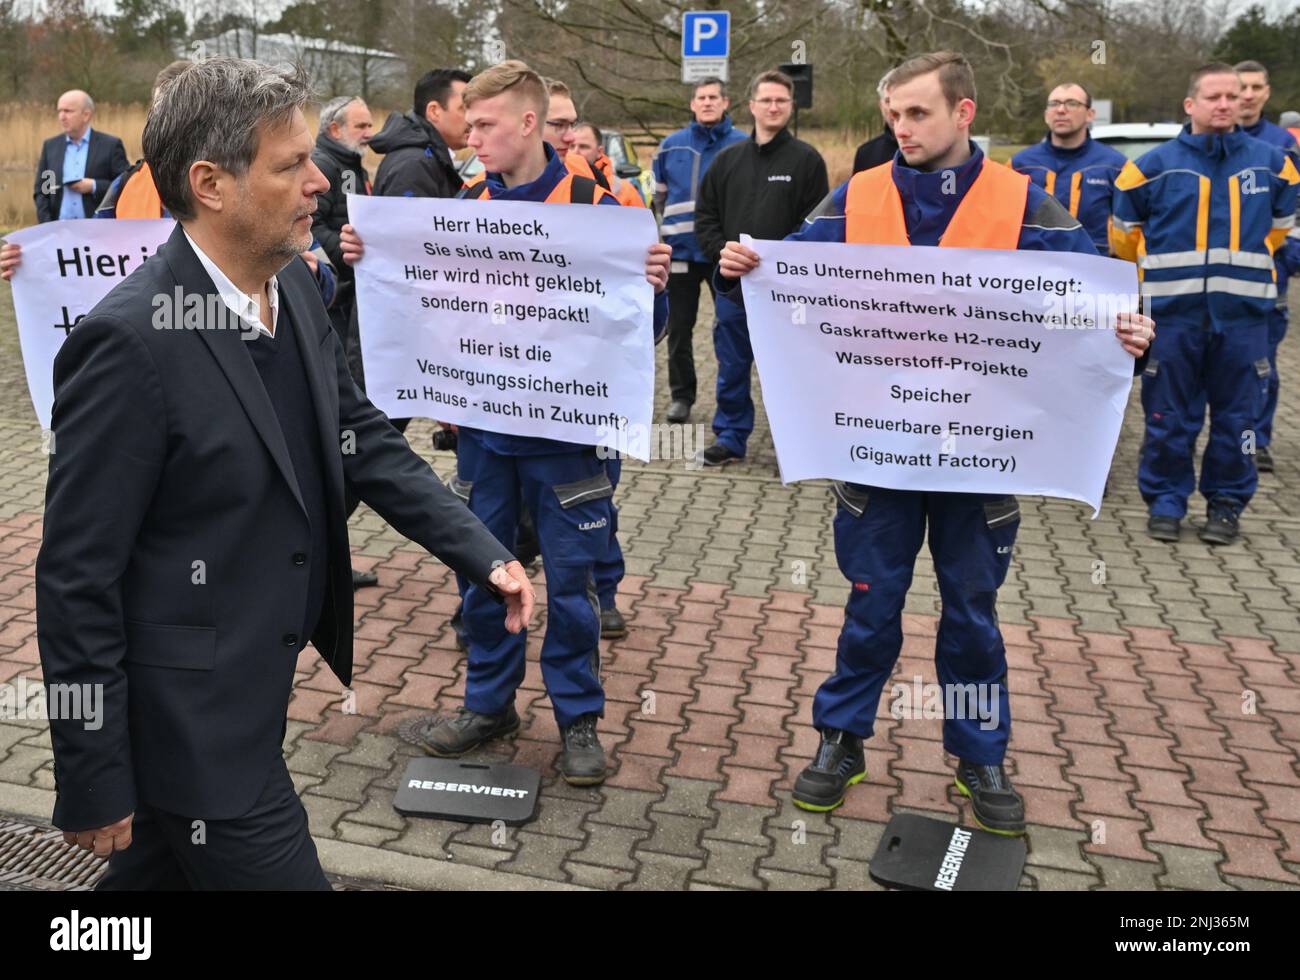 22 February 2023, Brandenburg, Spremberg: Robert Habeck (l. Bündnis 90/Die Grünen), Federal Minister of Economics and Climate Protection, walks past protesting apprentices and employees during a visit to LEAG's Schwarze Pumpe lignite-fired power plant. Robert Habeck visited four sites in Lusatia, in the eastern border region between Brandenburg and Saxony, on the same day to learn about various transformation measures in the opencast mining region. An innovative hydrogen storage power plant is being built at the Schwarze Pumpe industrial park. The power plant is to supply energy generated from Stock Photo